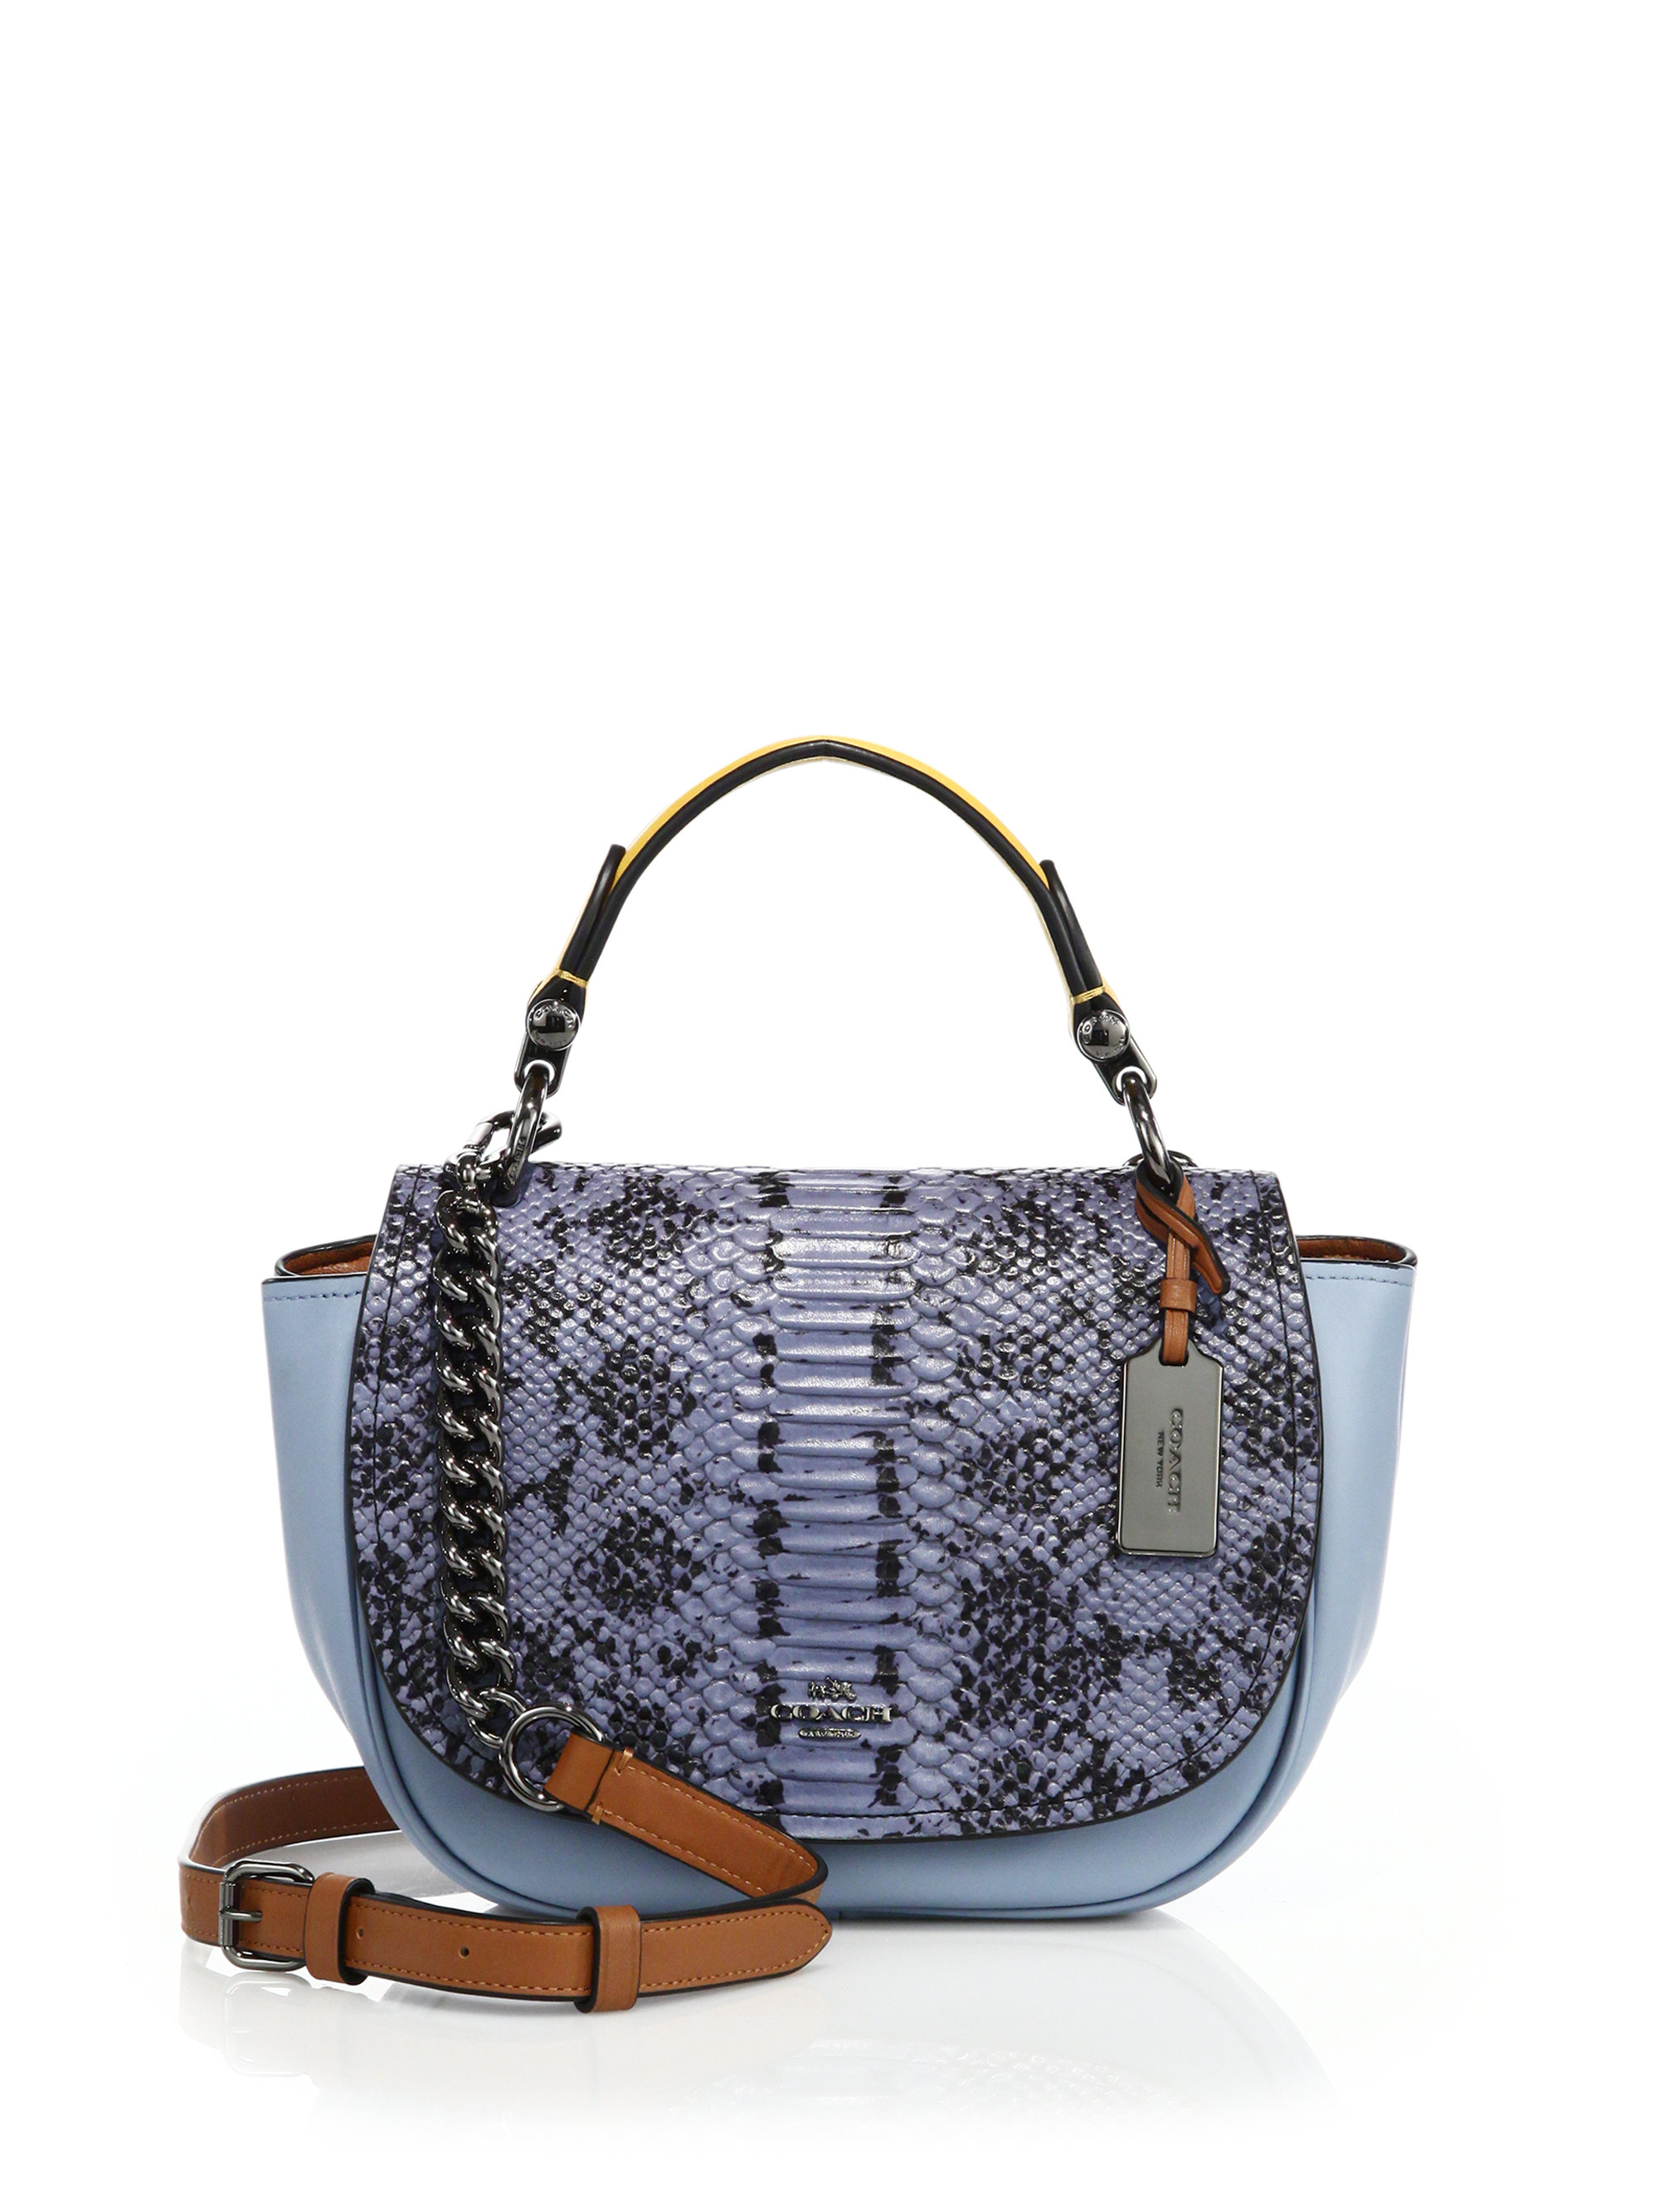 Lyst - COACH Nomad Multicolor Snake-embossed Leather Crossbody Bag in Blue